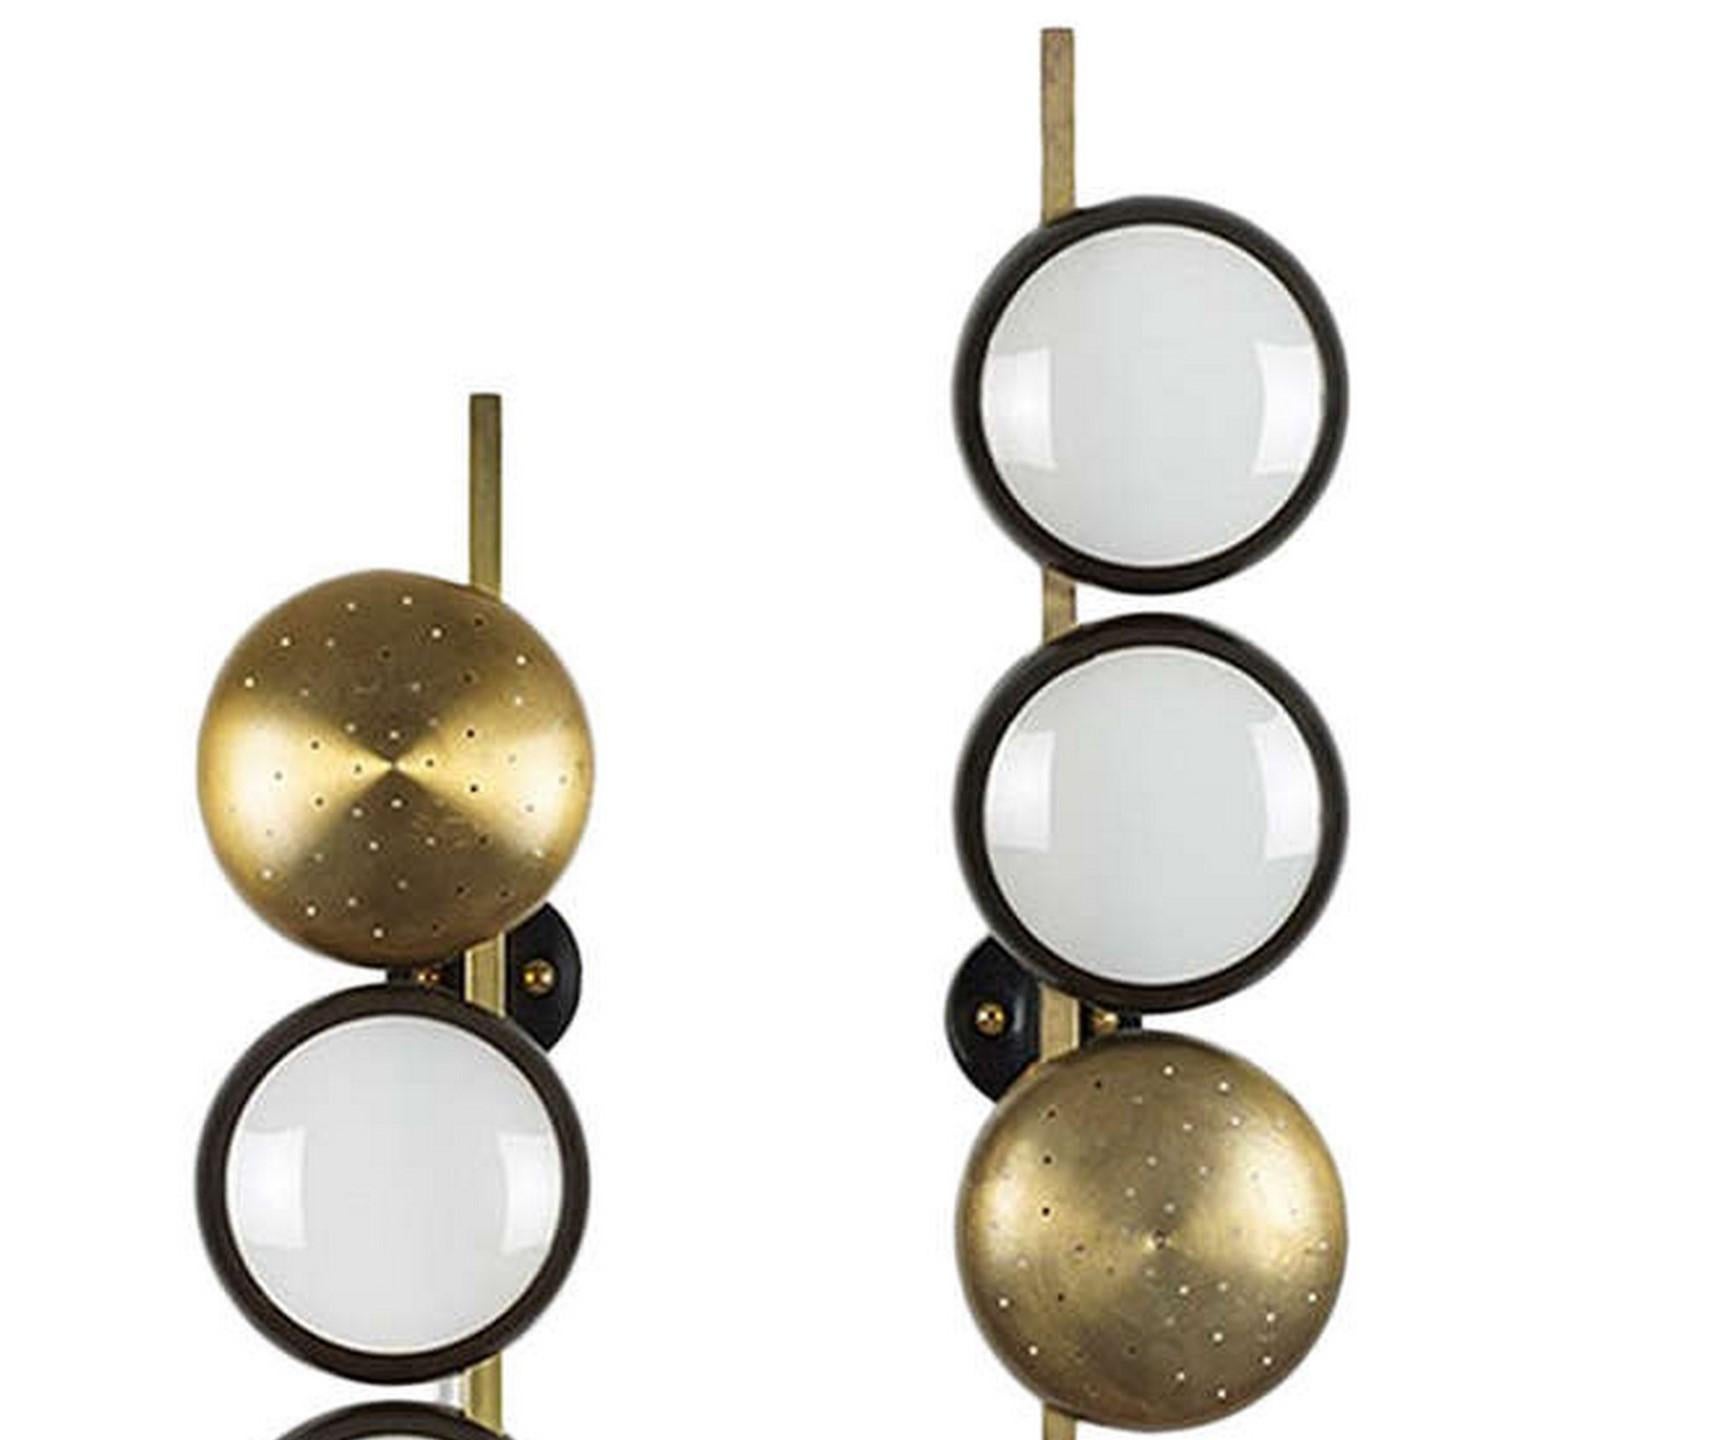 Pair of rare elegant well sized wallights Model 579 designed by the well known designer Oscar Torlasco and produced by Lumi. They have one reflector in brass per wallight with pierced holes to reflect light and the other two reflectors have bronzed